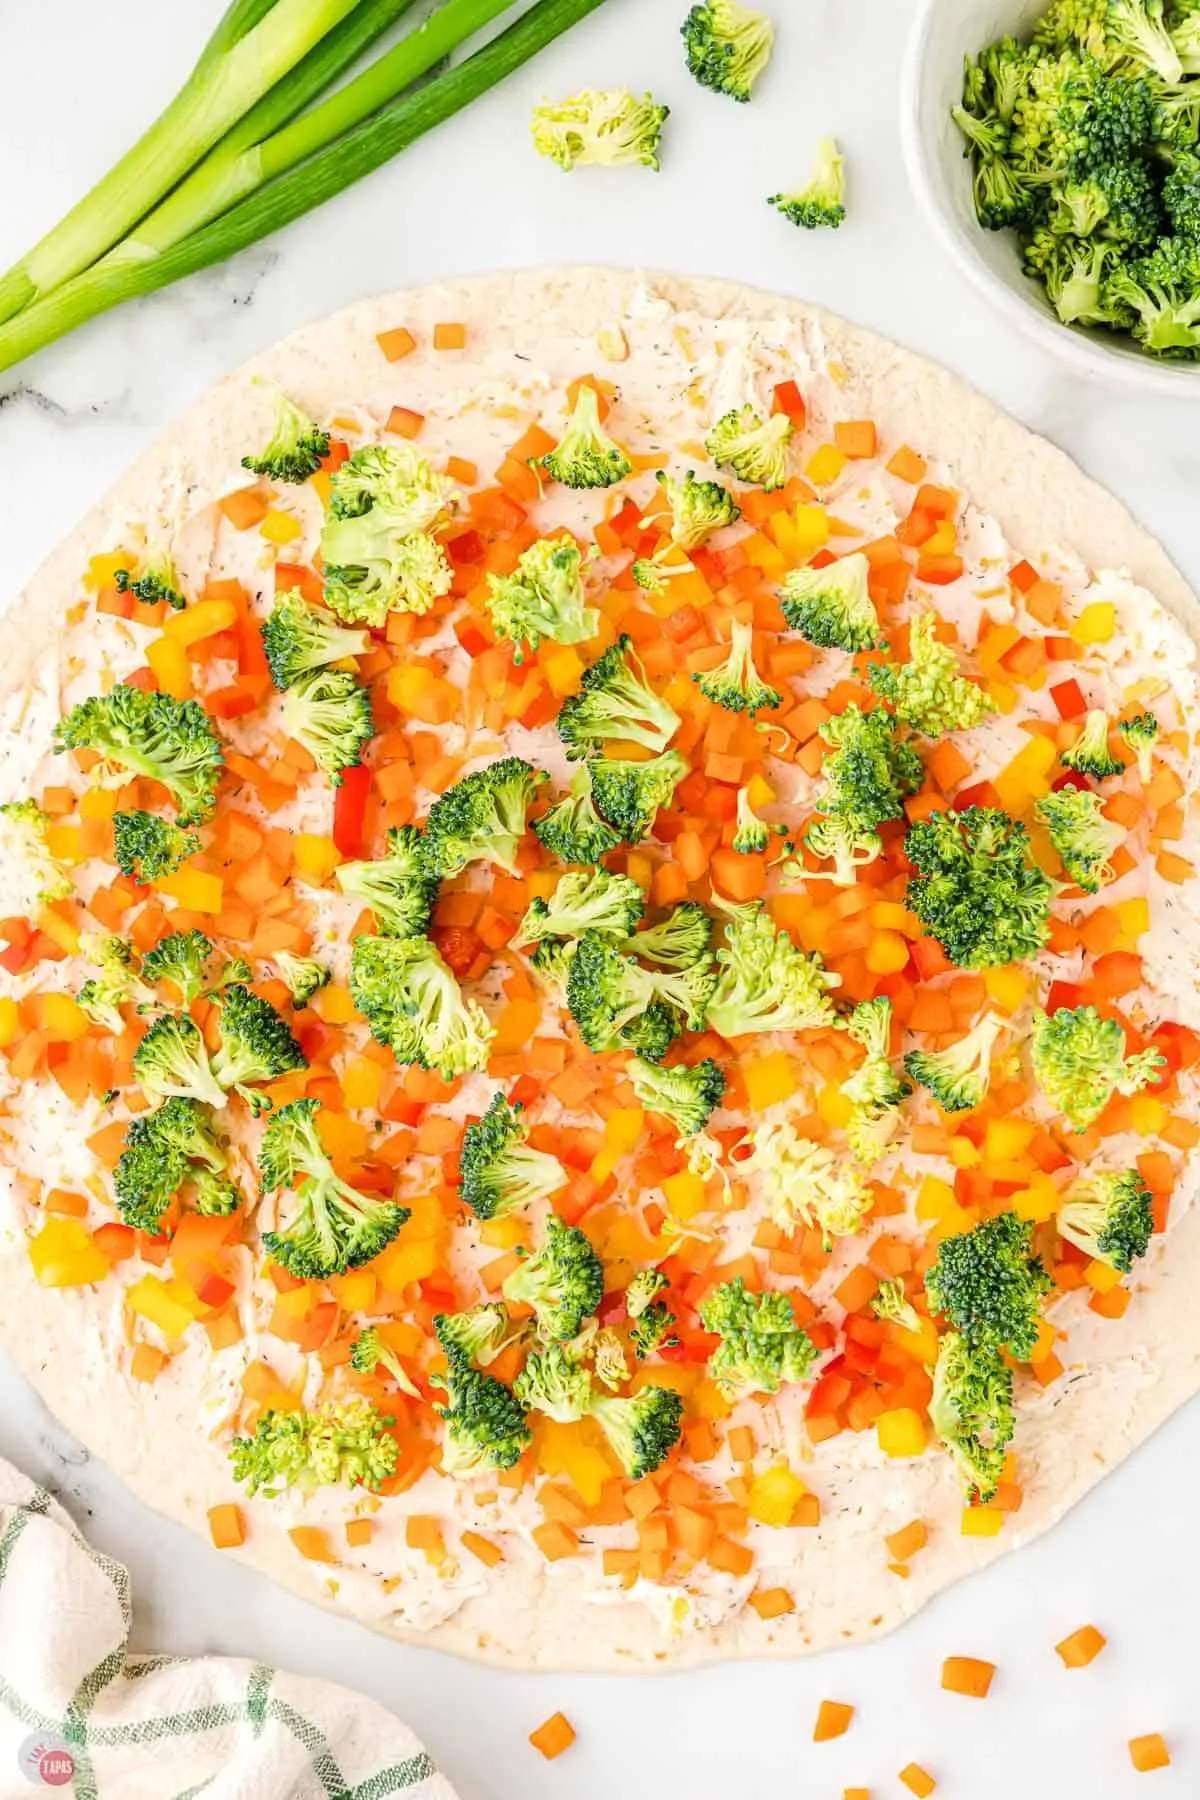 finely chopped broccoli and bell peppers on a tortilla